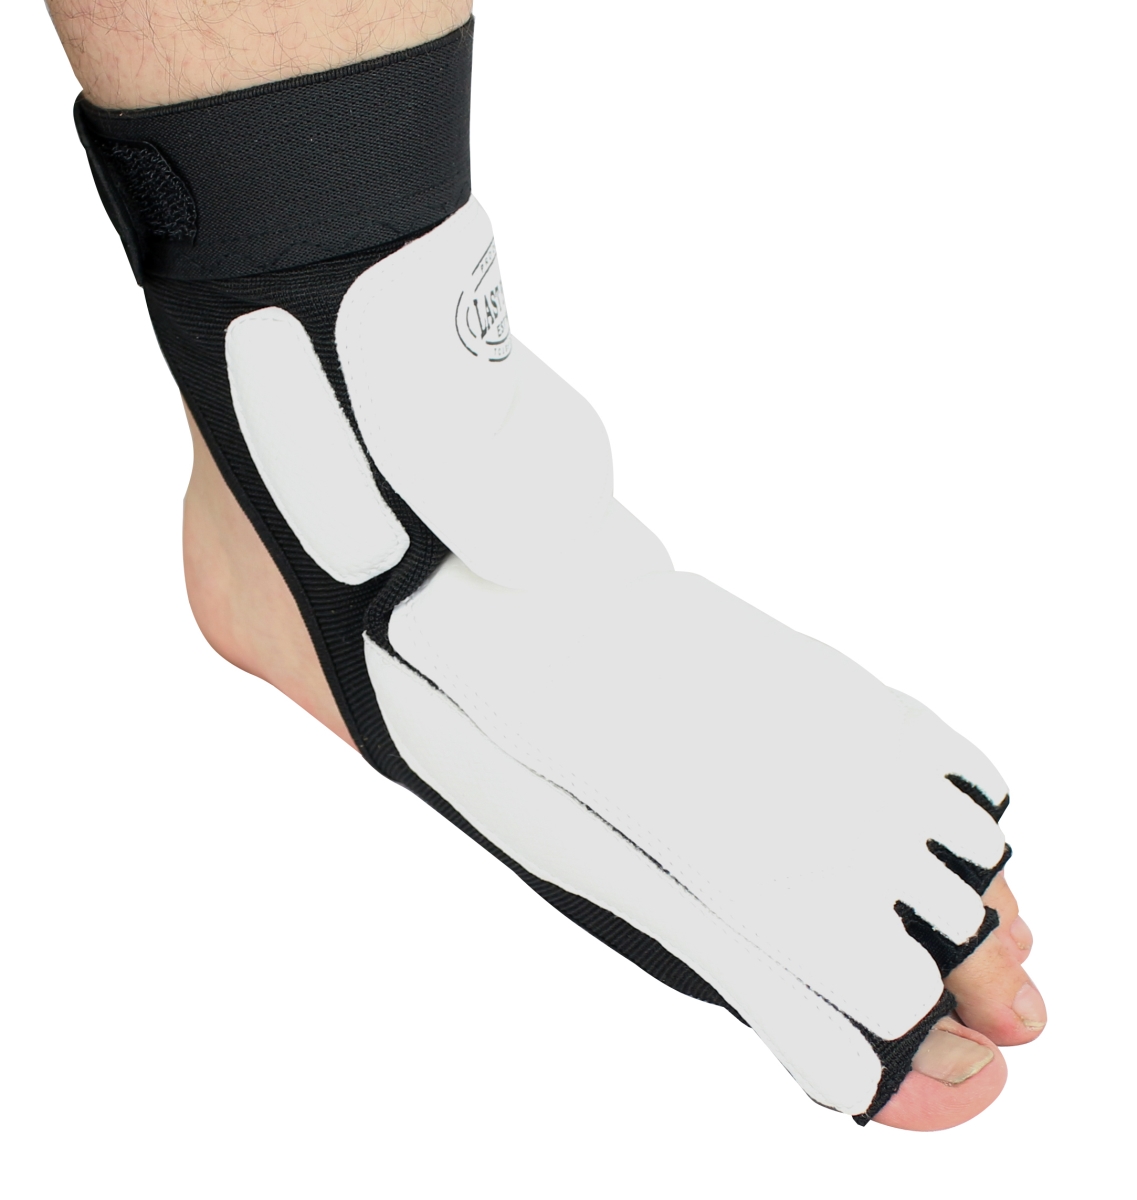 9619-s High Quality Taekwondo Foot Ankle Support Protector Kick Boxing Footwear - Small